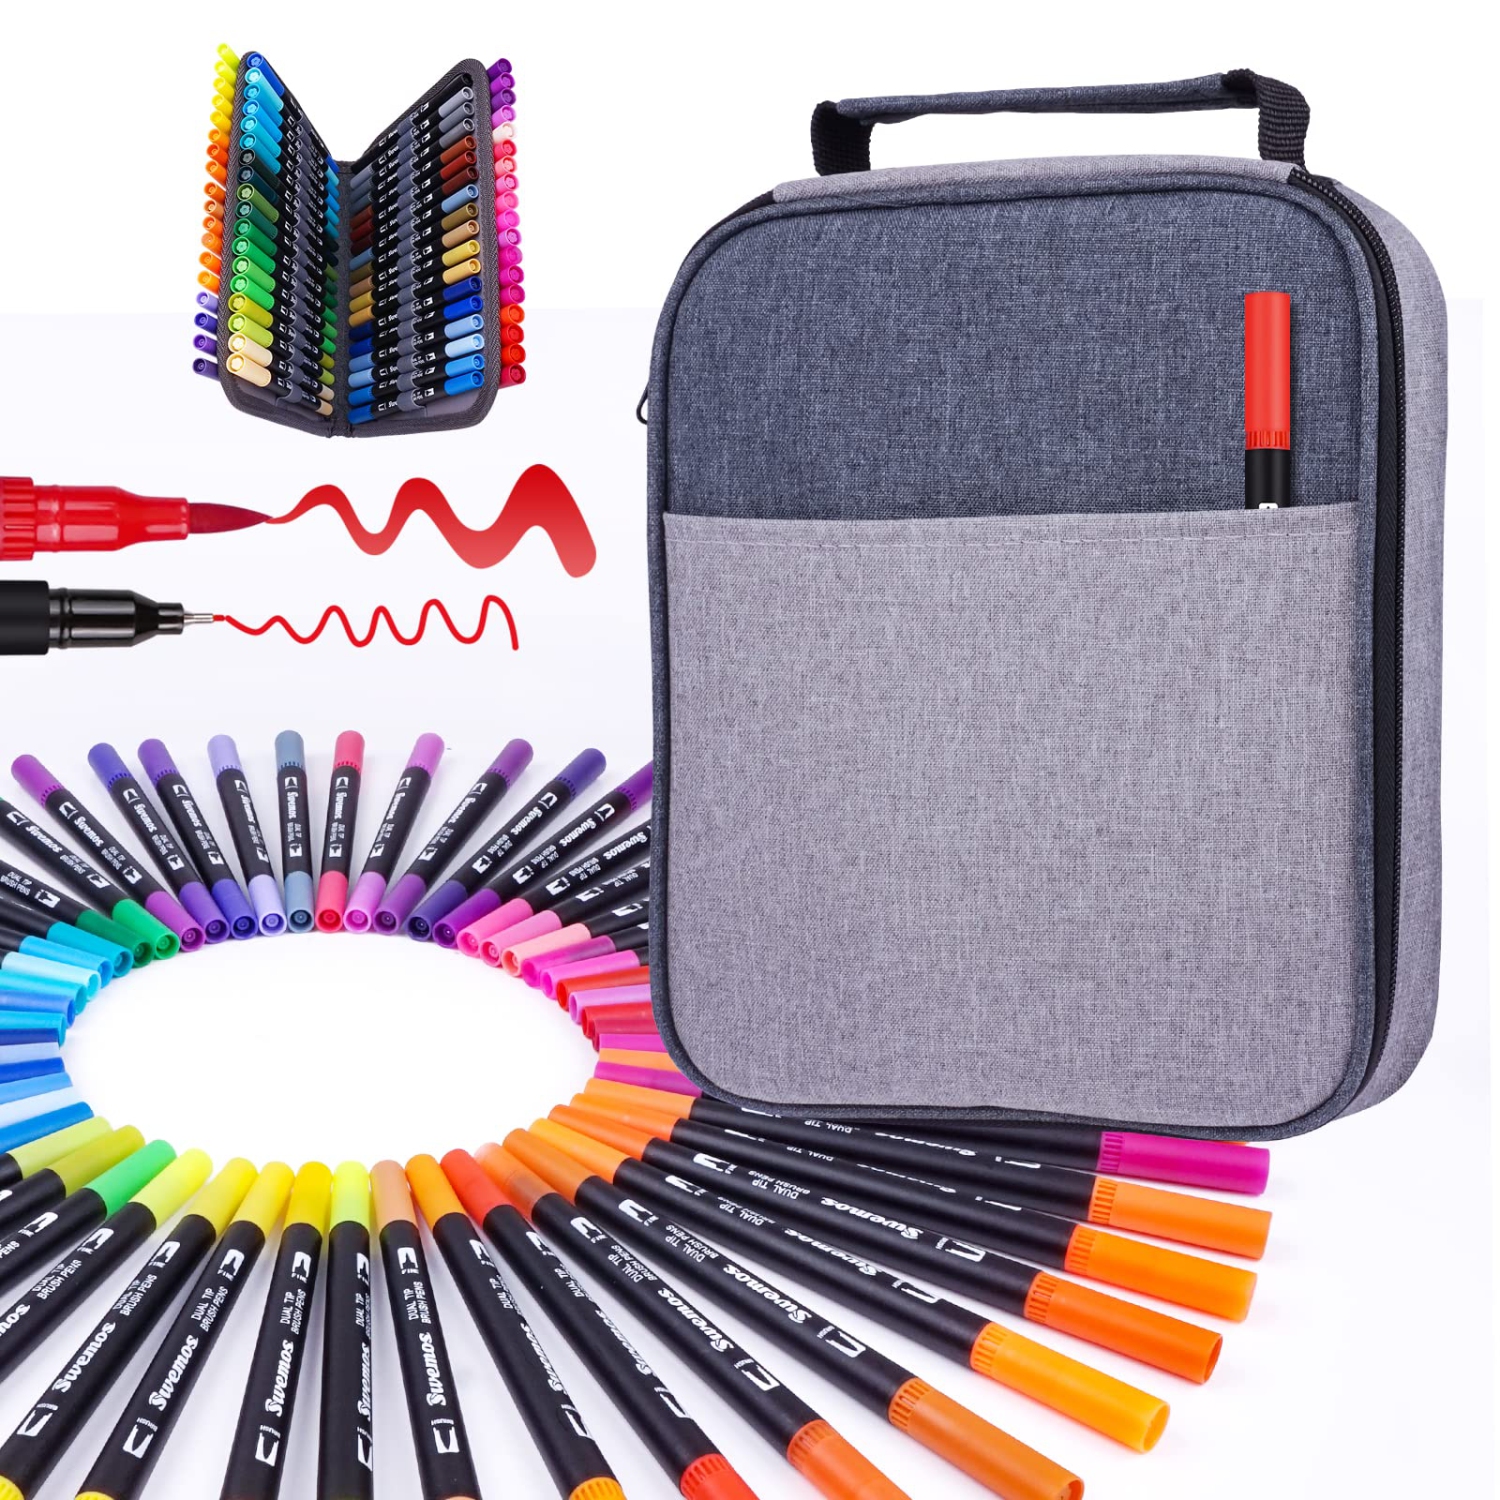 Colorful Creations: 72 Dual Tip Brush Markers Set for Adult Coloring Book, Fine Point Art Pens for Kids, Artists, and Journaling - Complete Art Supplies Kit with Portable Case